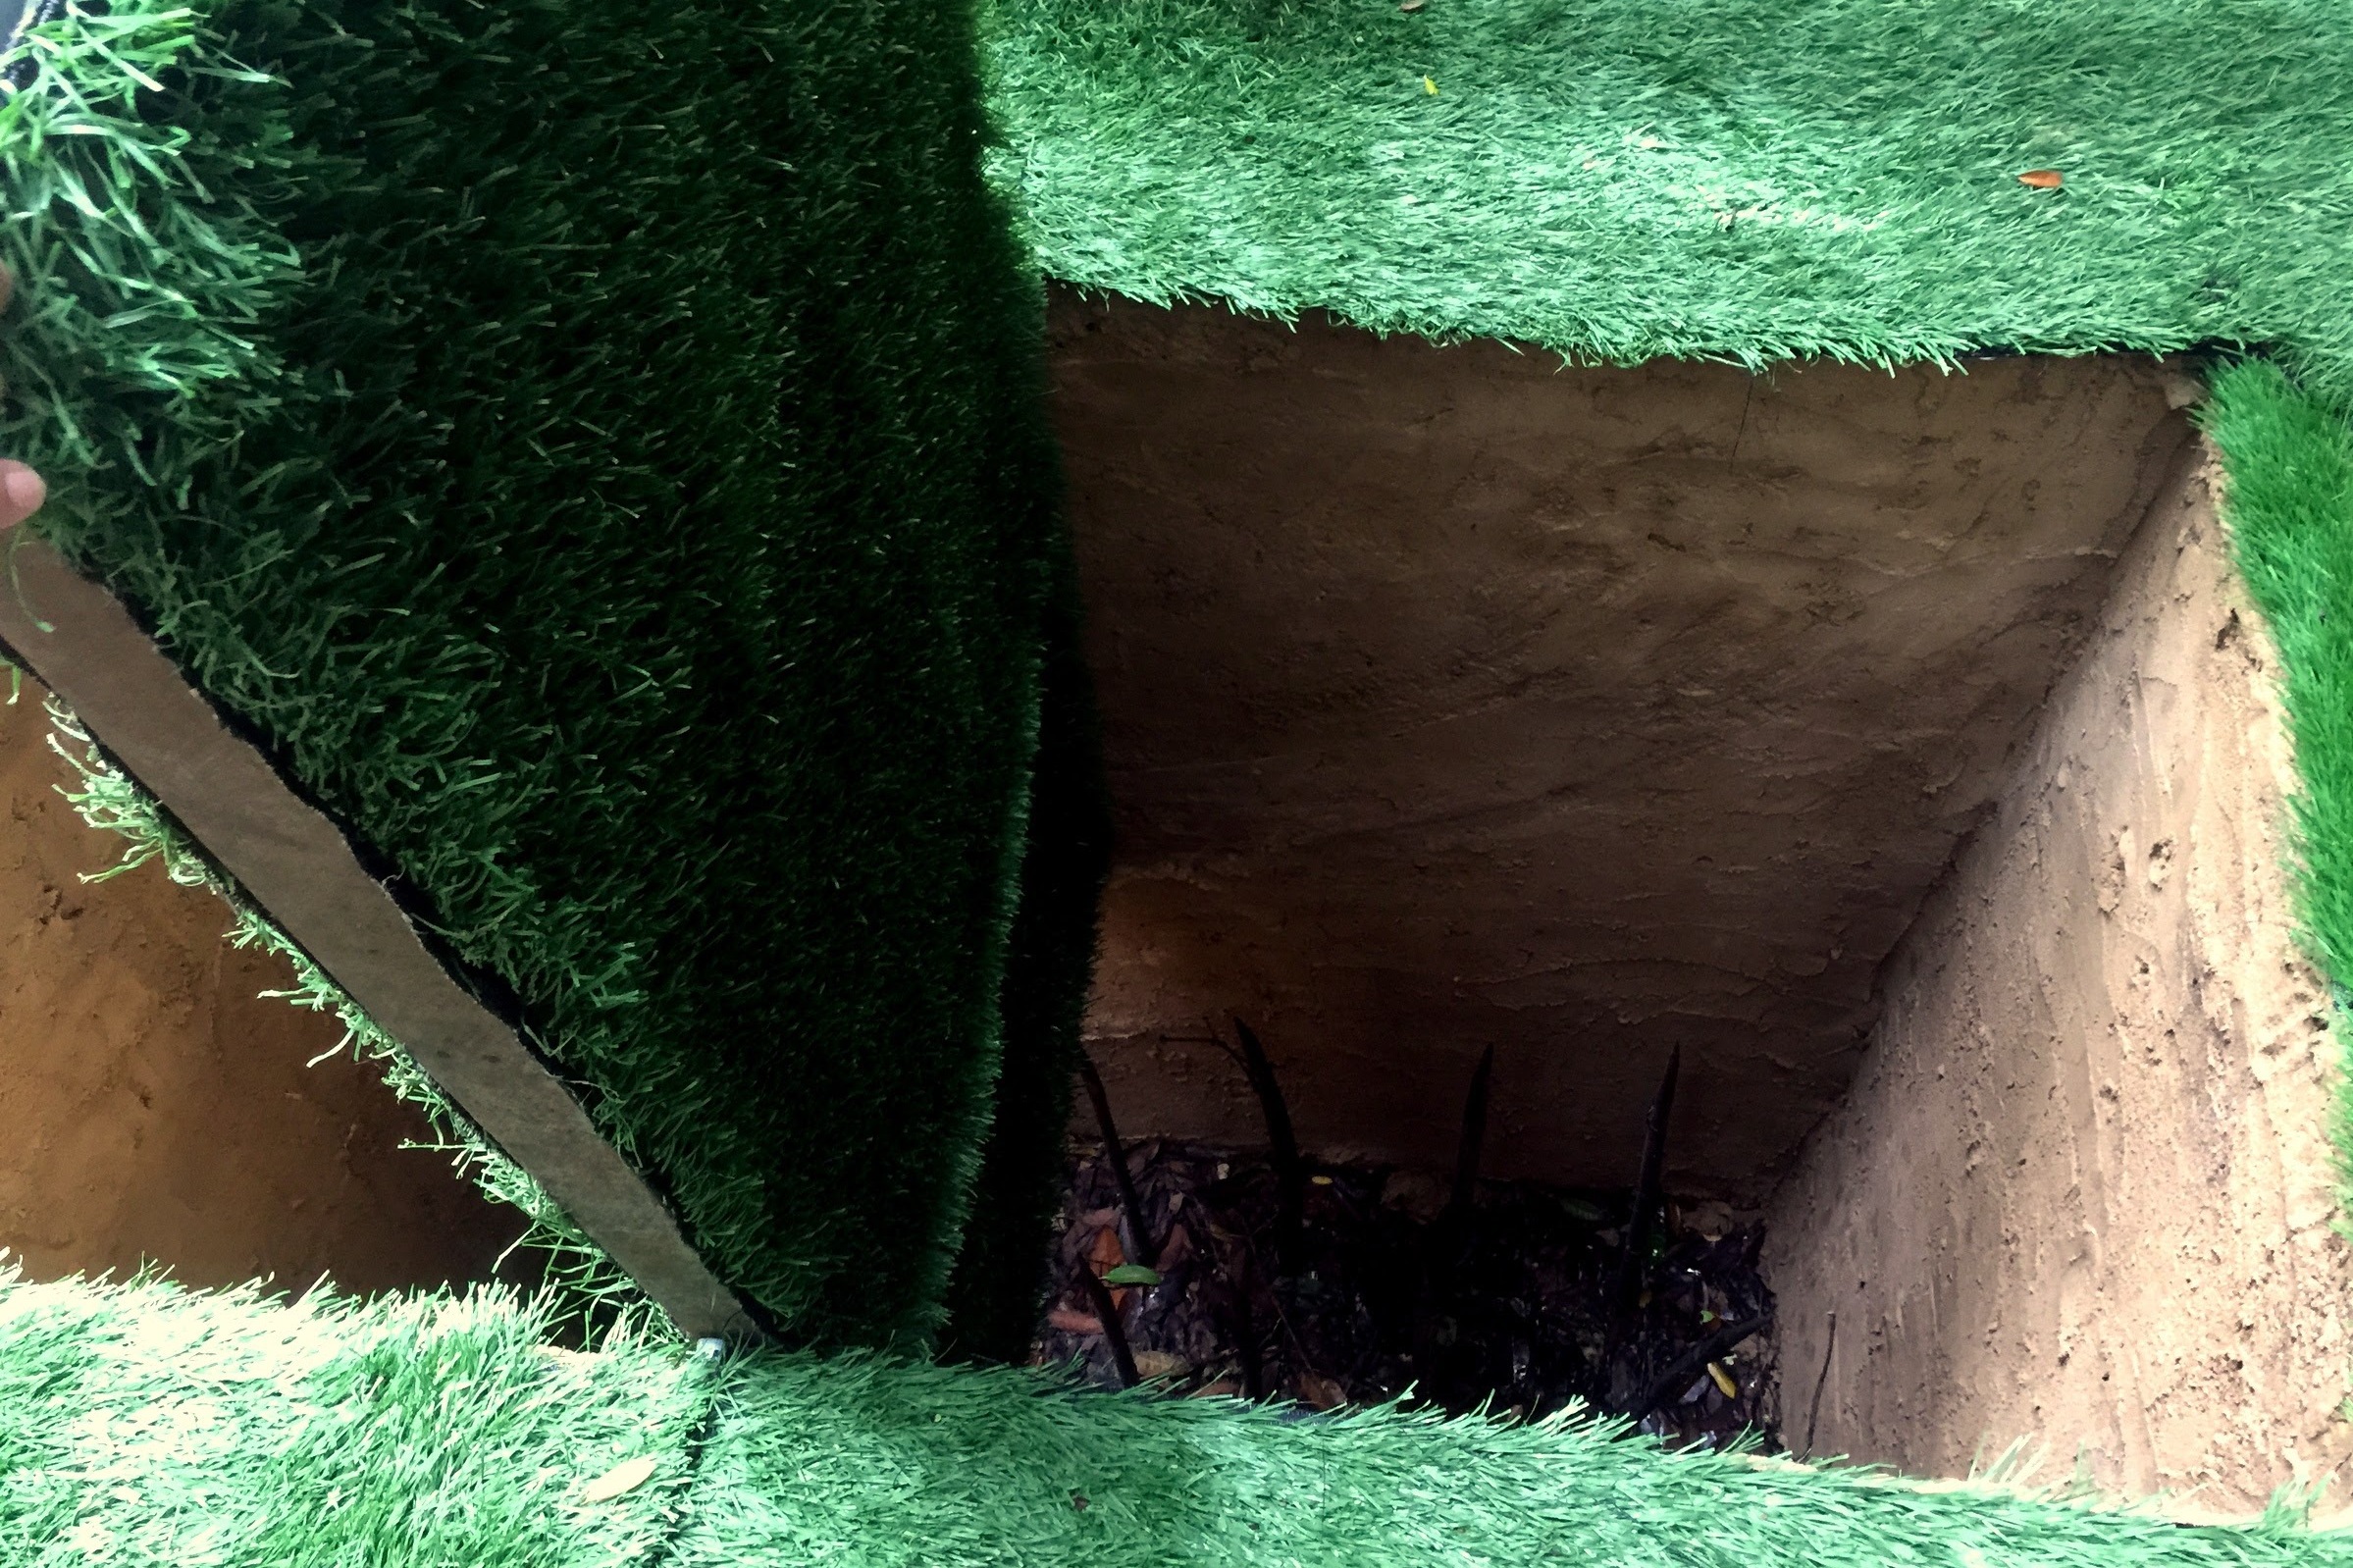 Cu Chi Tunnels Traps An Ingenious Defense System of War